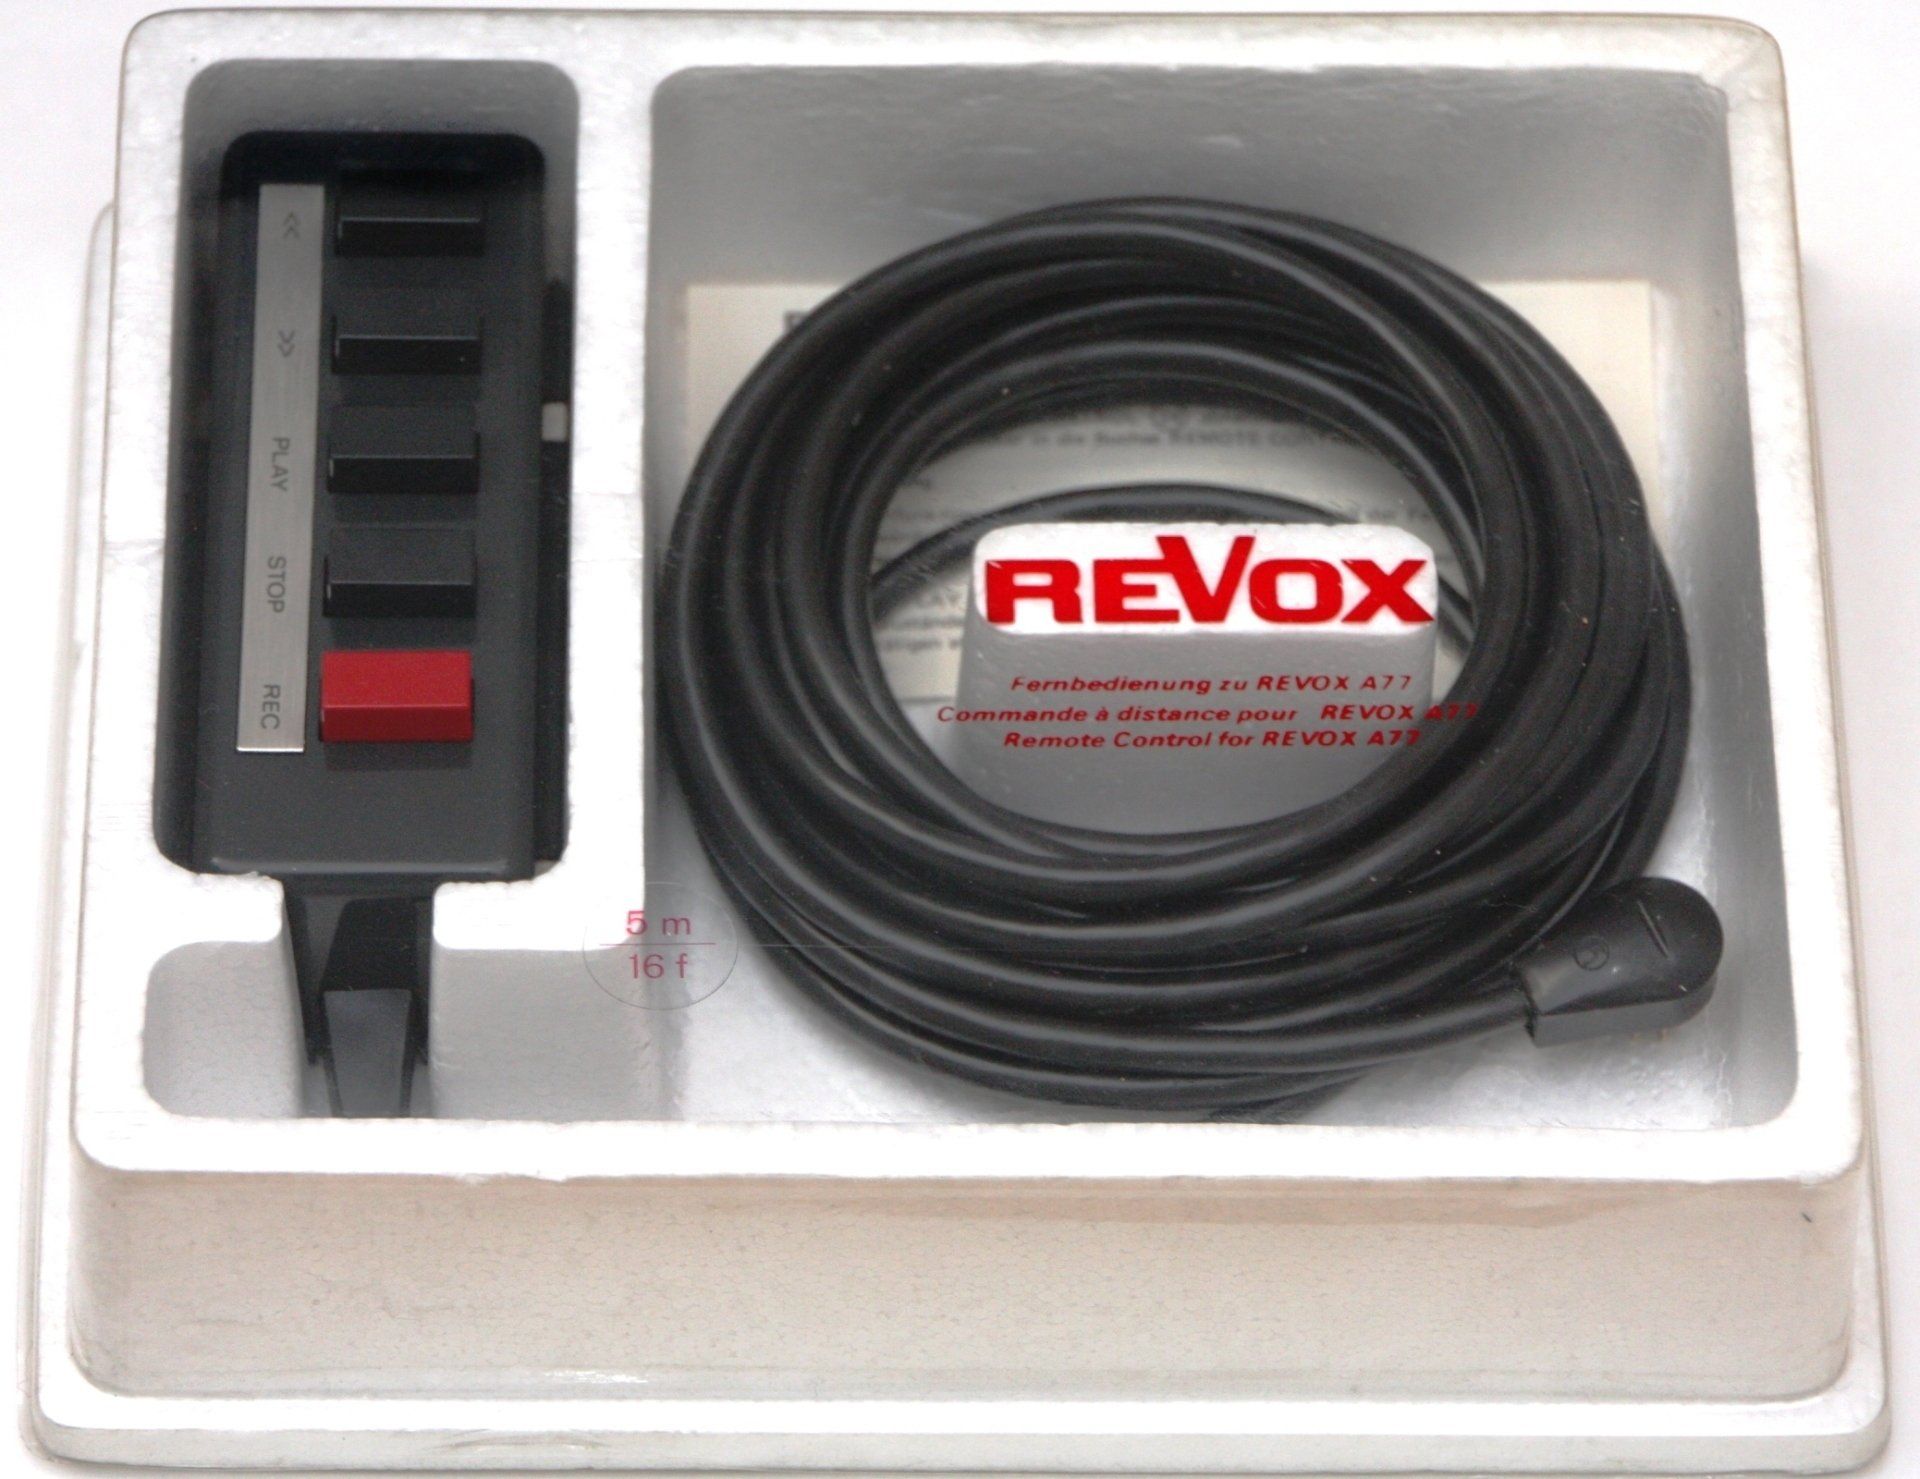 Cable remote control for Revox A77 in the original packaging